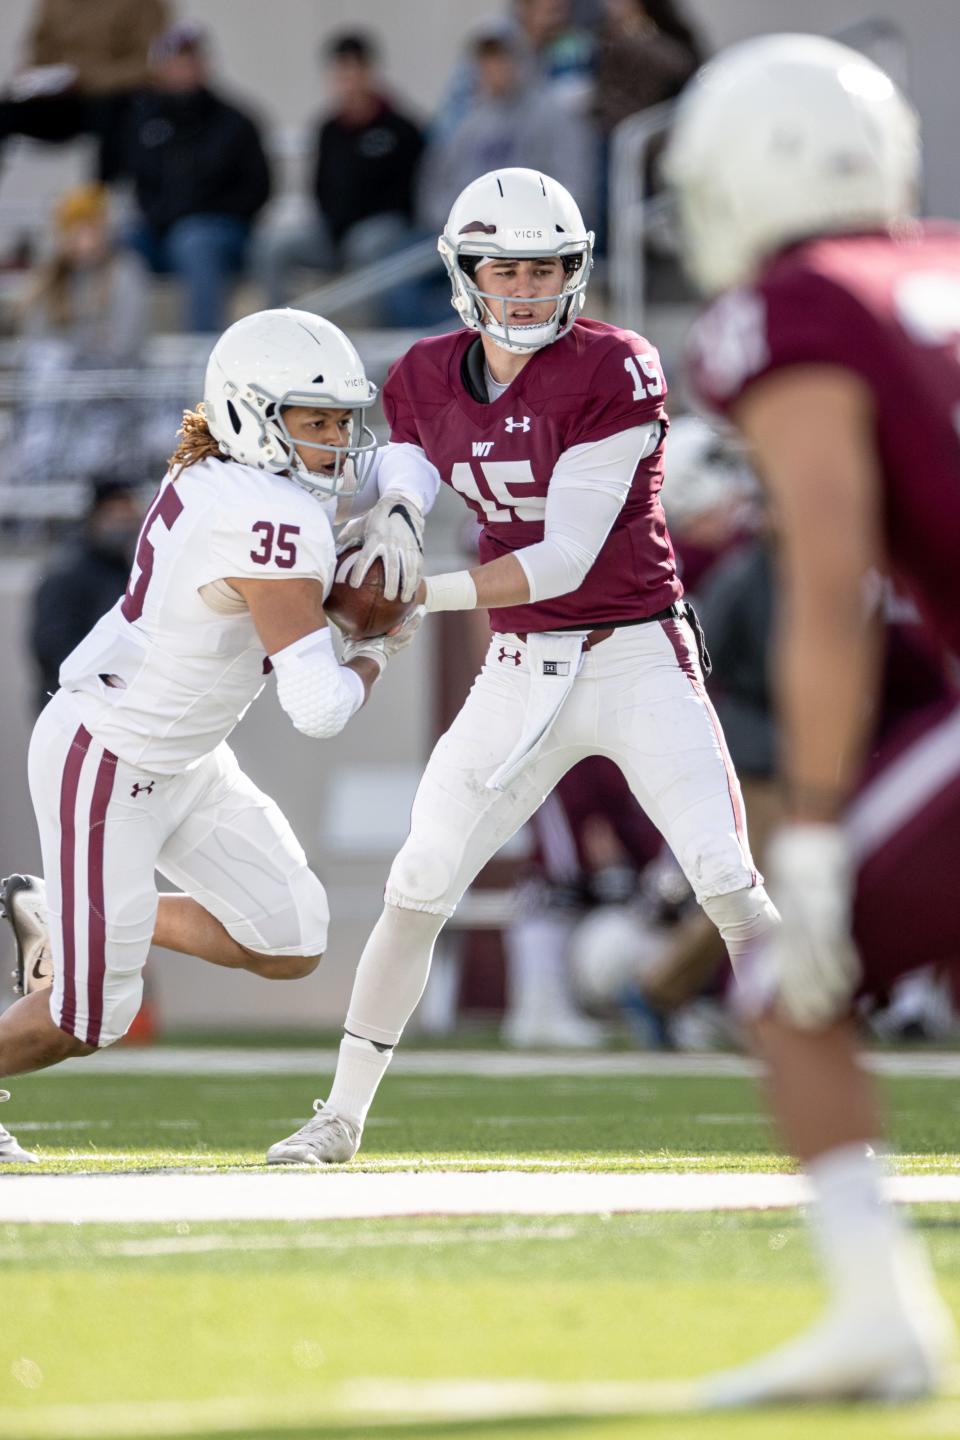 West Texas A&M's quarterback (15), Nick Gerber, hands the ball off on April 17, 2021 at Buffalo Stadium in Canyon, TX.